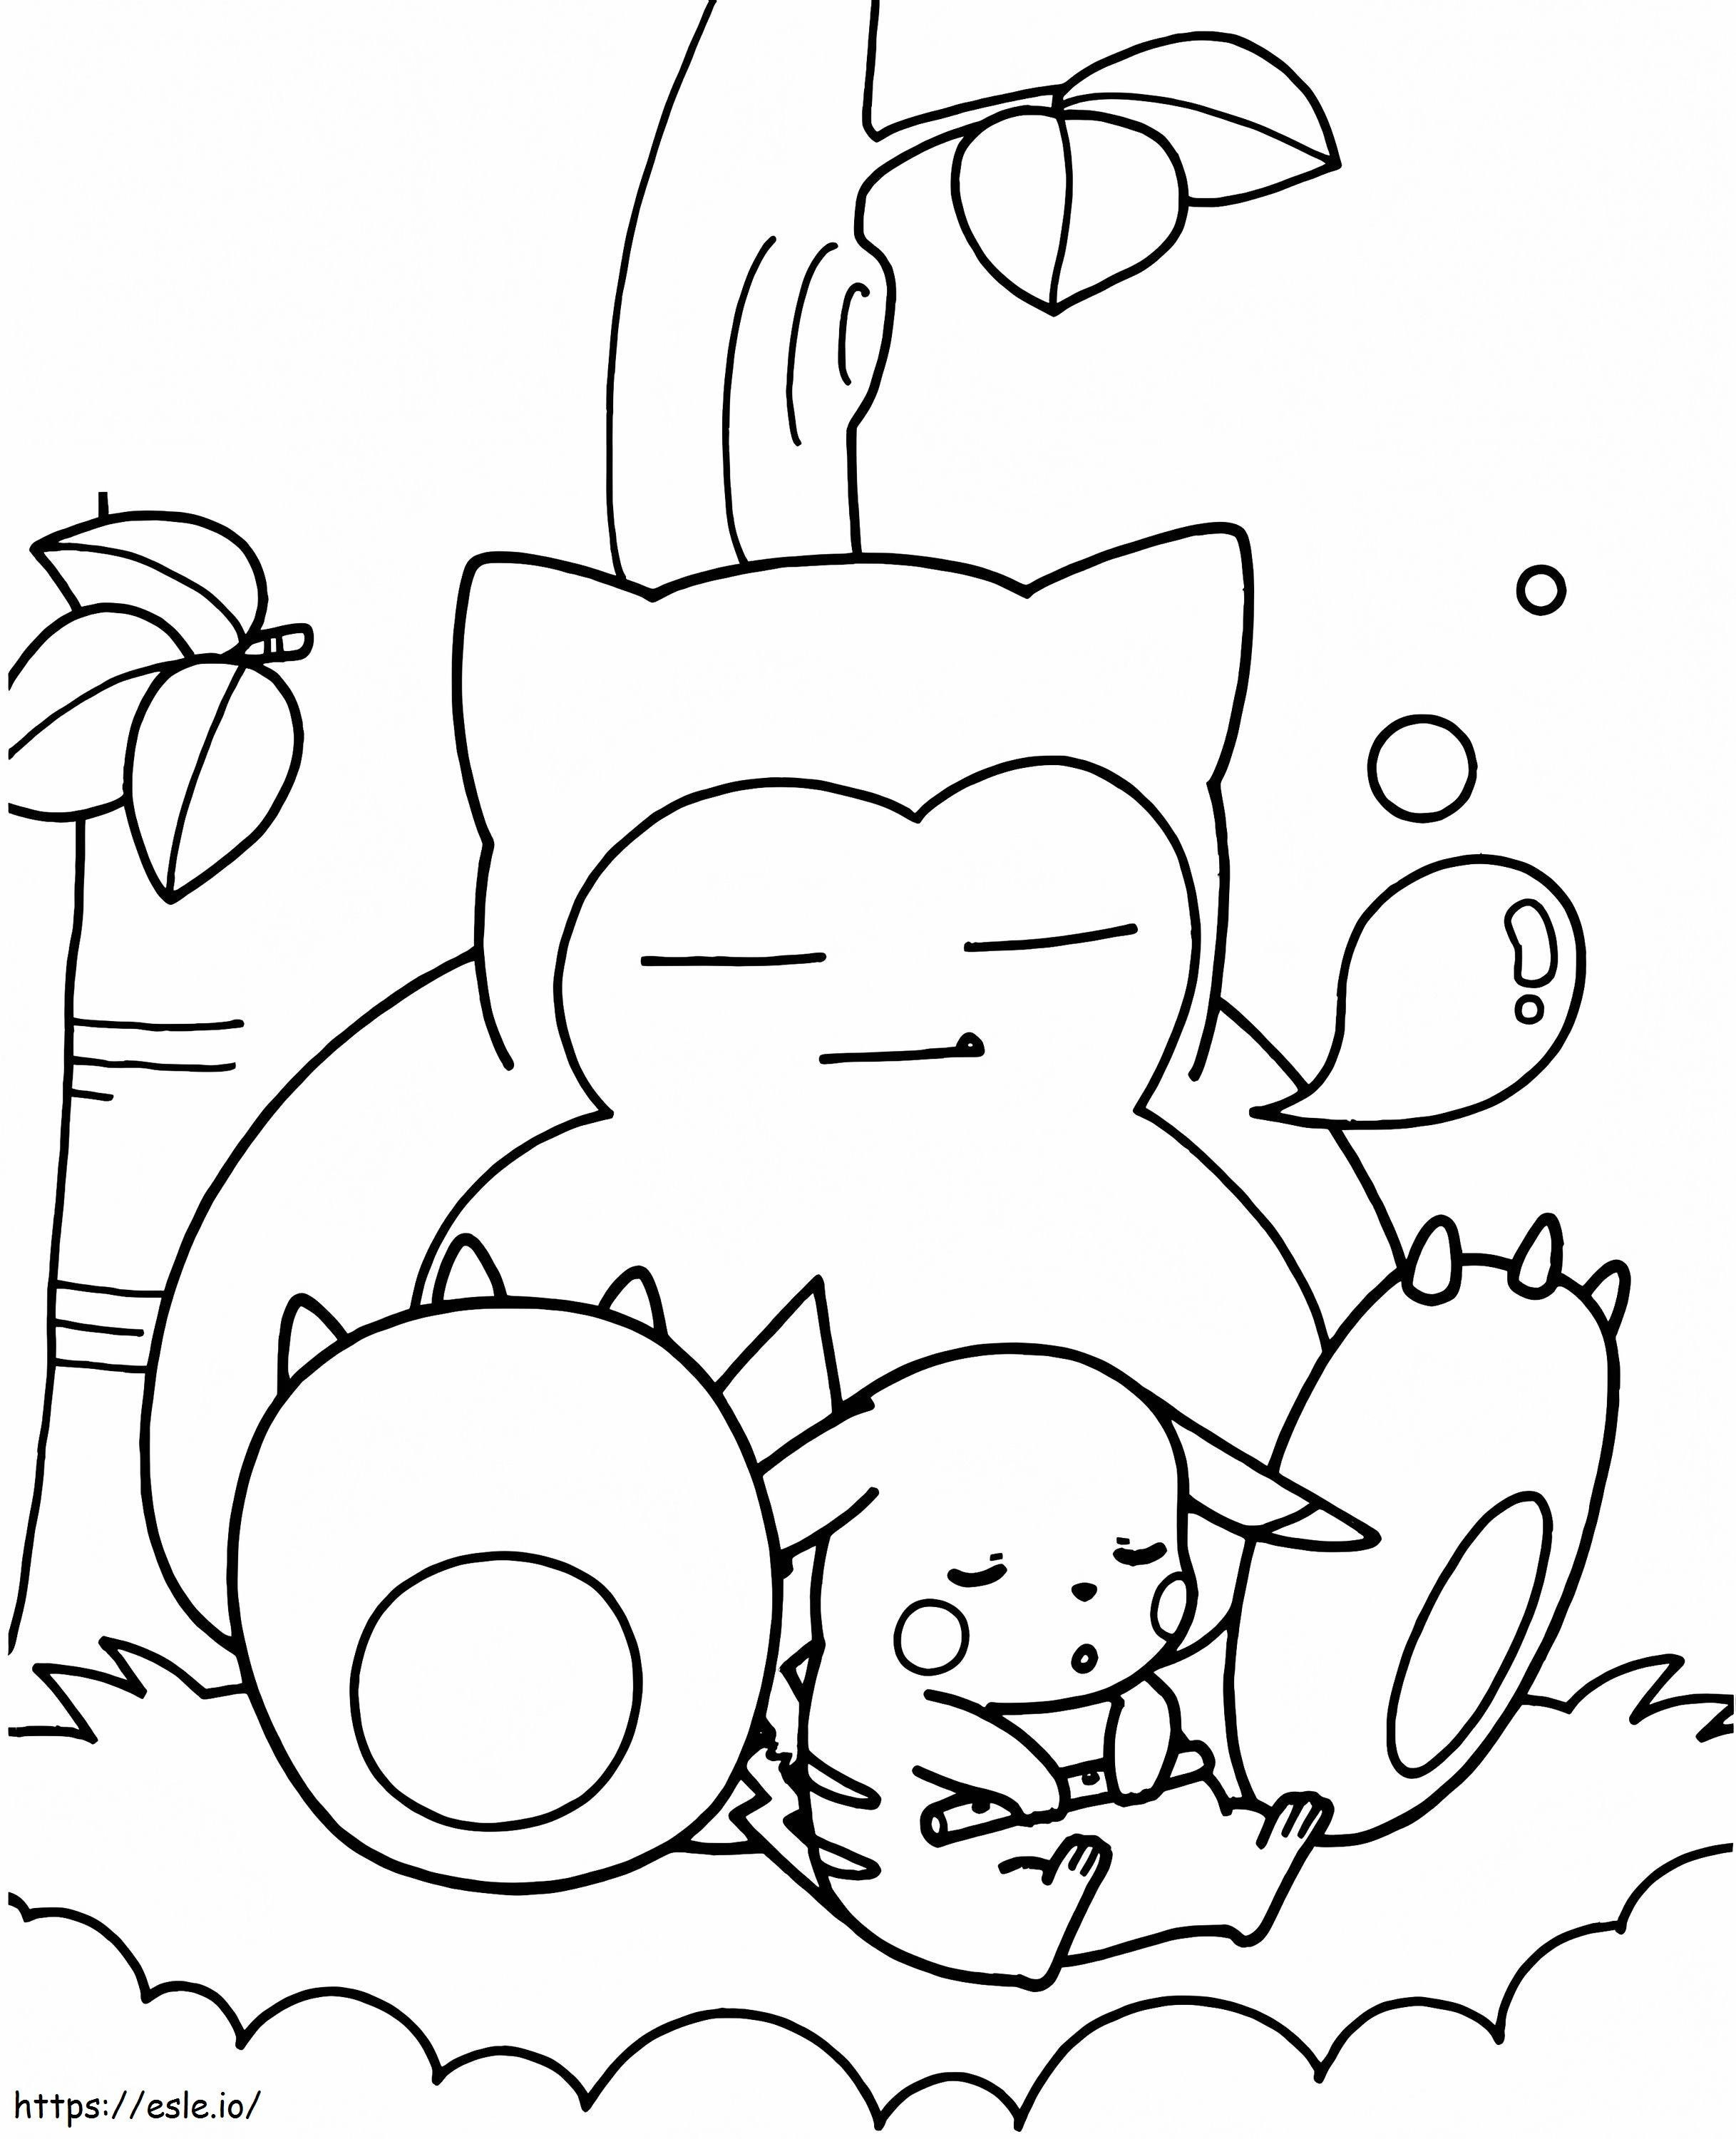 Pikachu And Snorlax coloring page